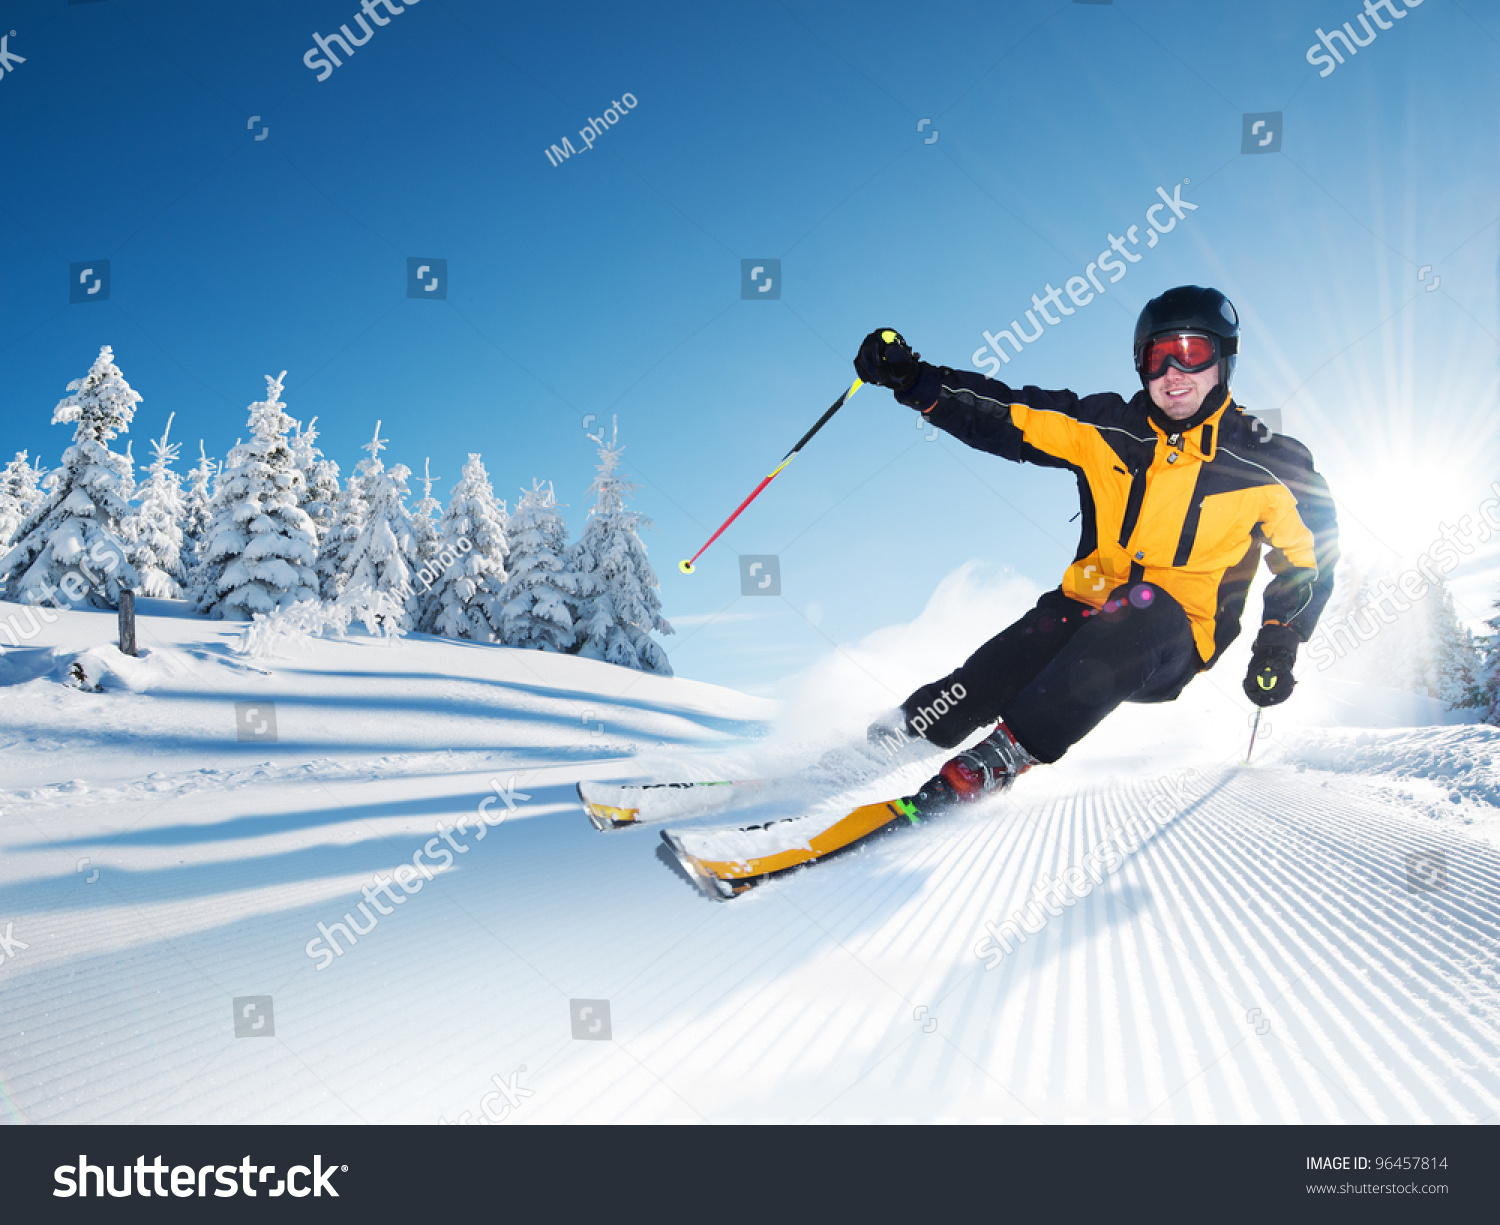 Skier in mountains, prepared piste and sunny day #96457814